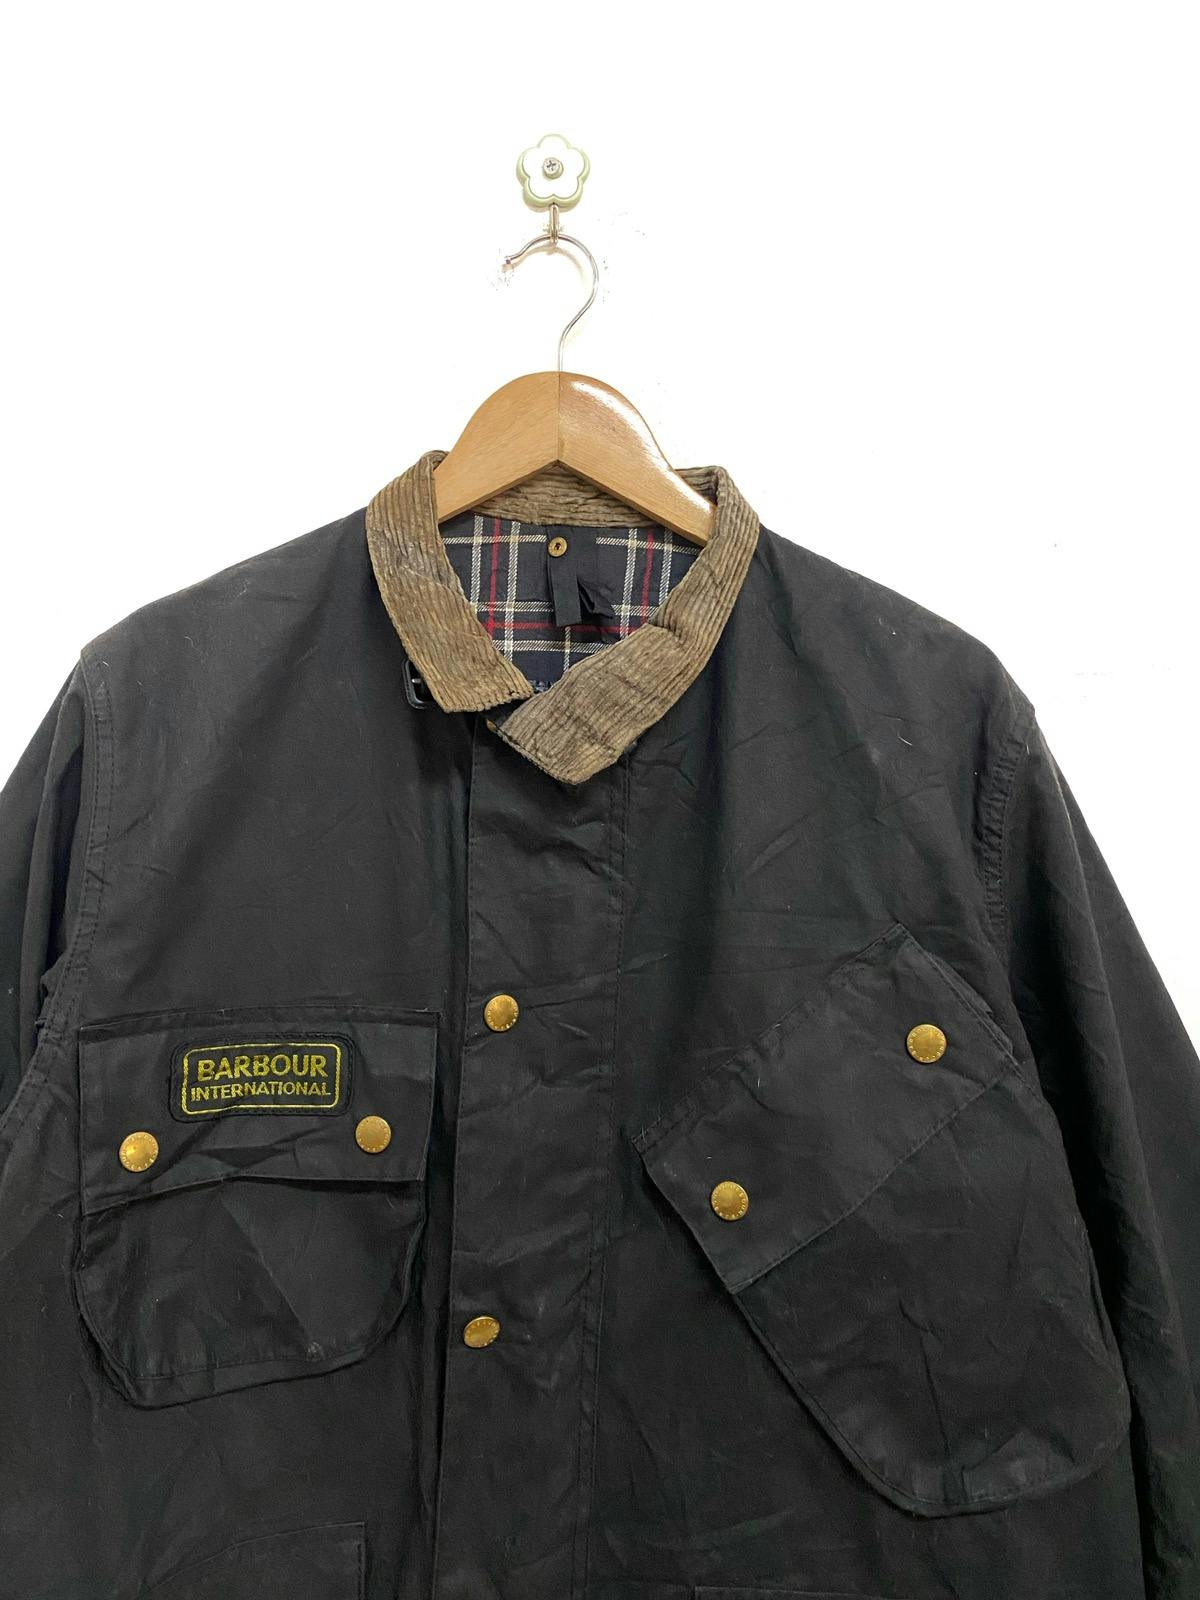 Barbour A7 International Suit Wax Jacket Made in England - 2